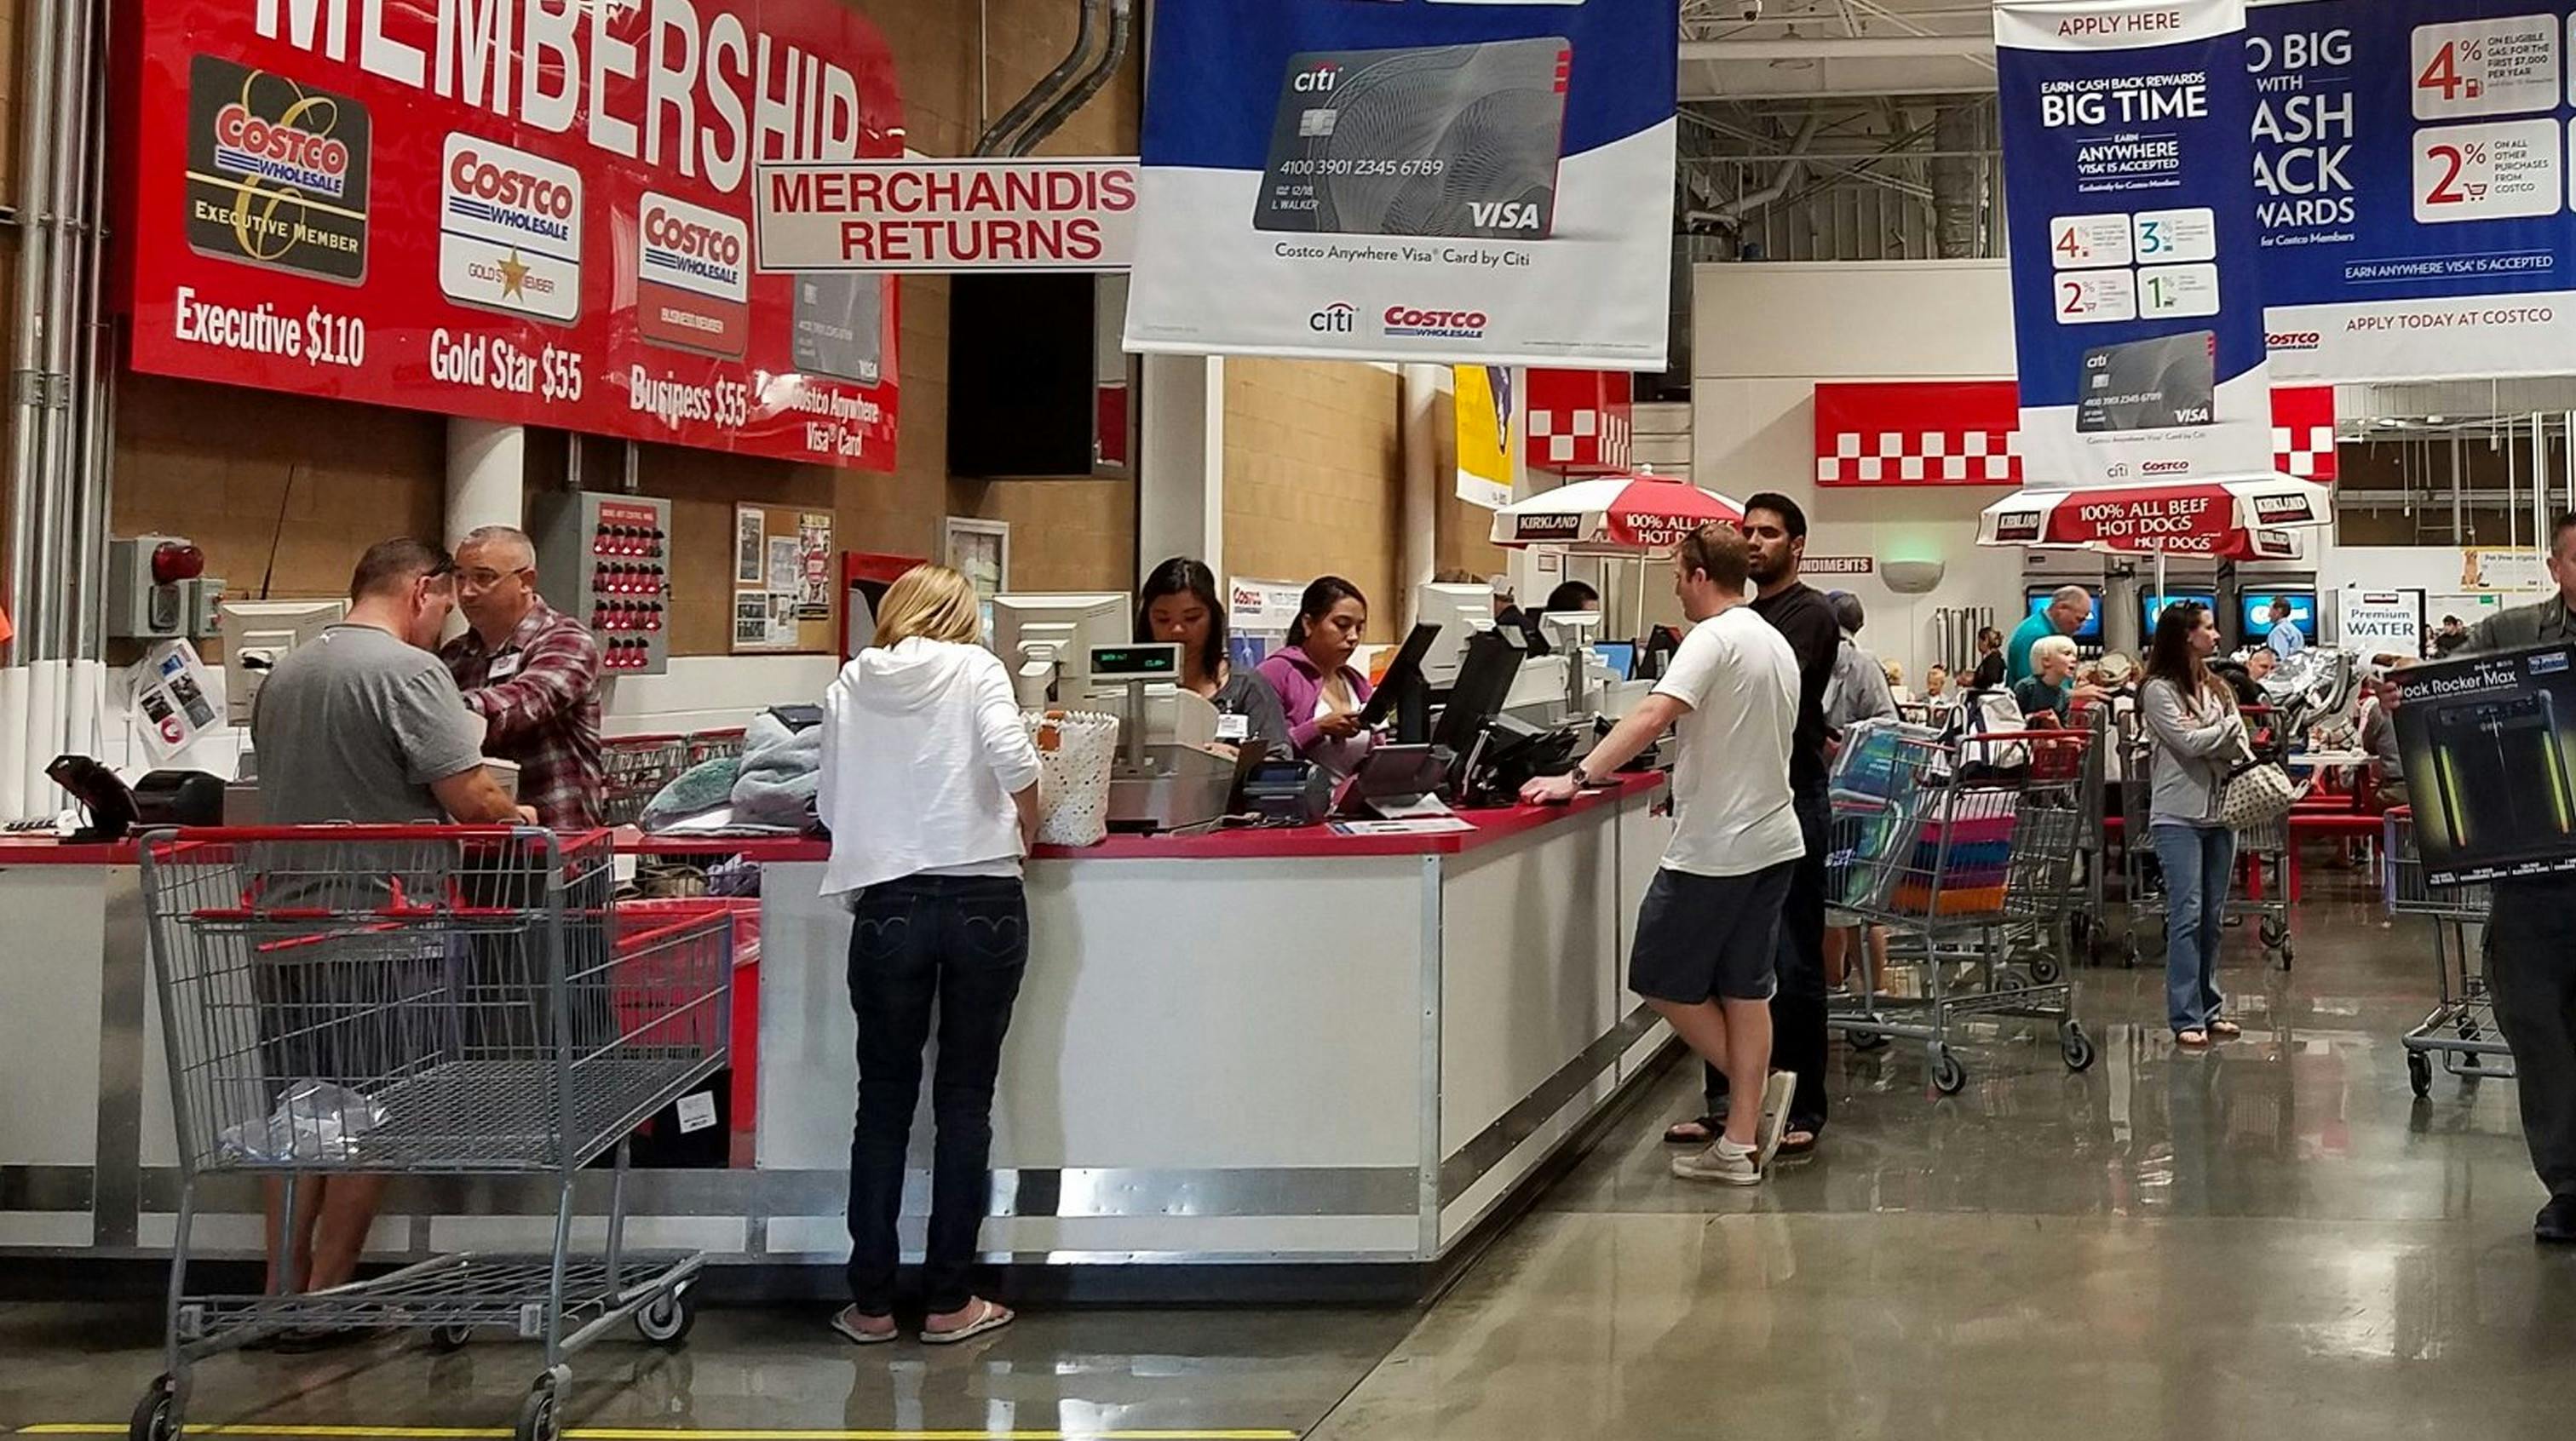 Costco Return Policy Here's Exactly What You Can and Can't Do The